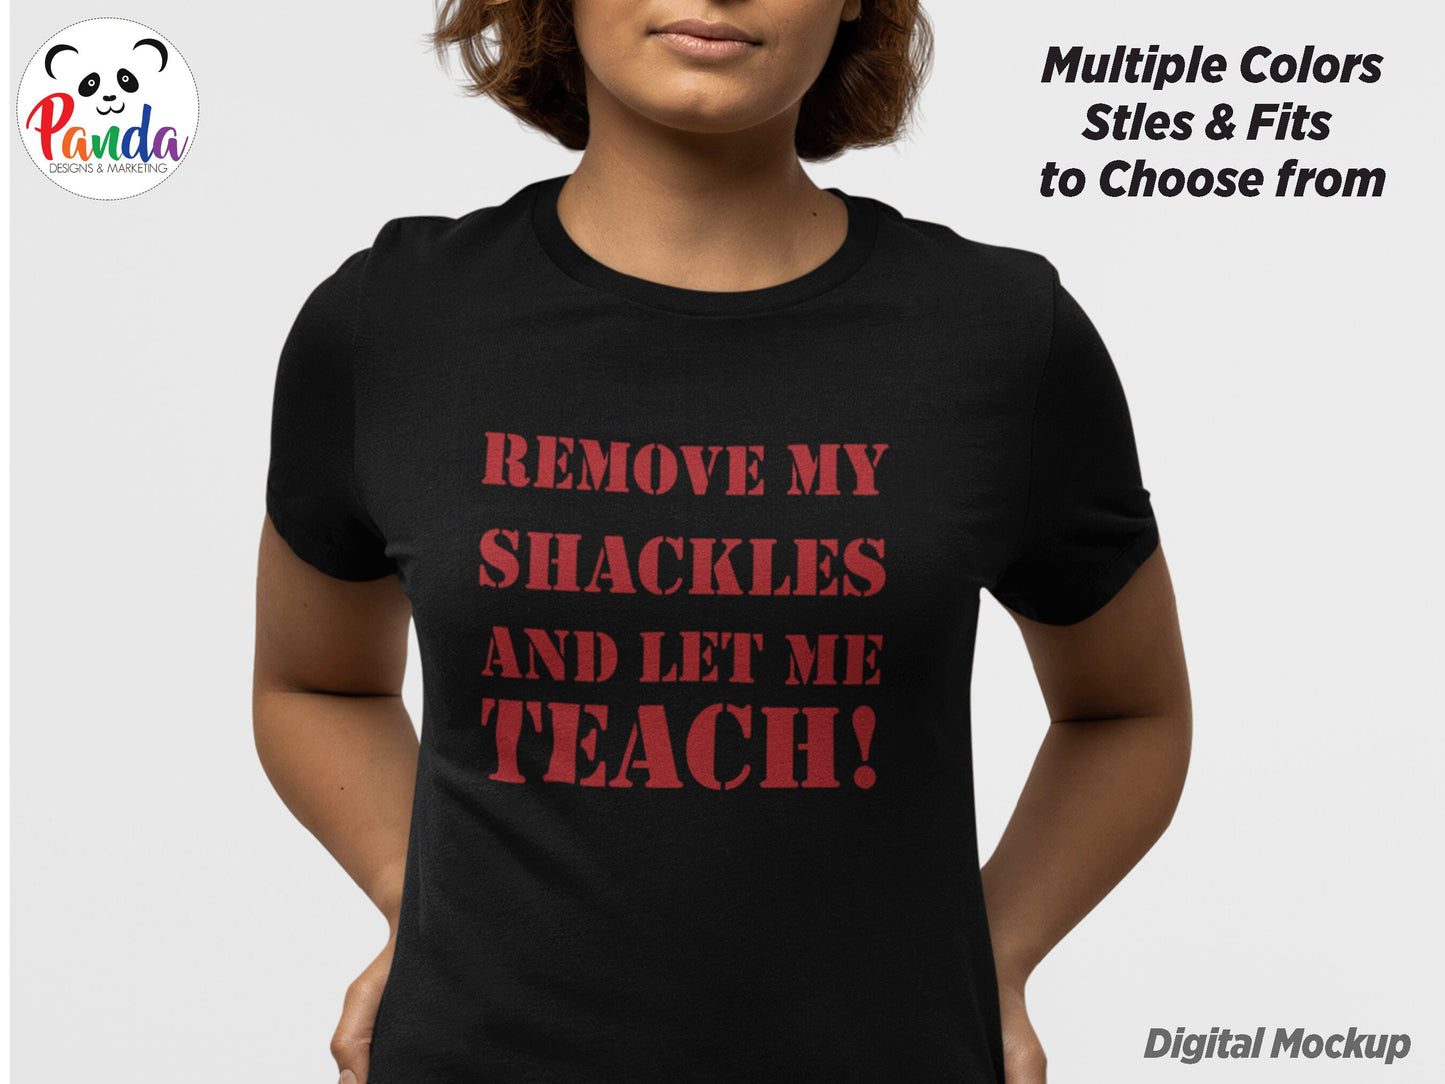 Remove My Shackles and Let Me Teach! T-shirt